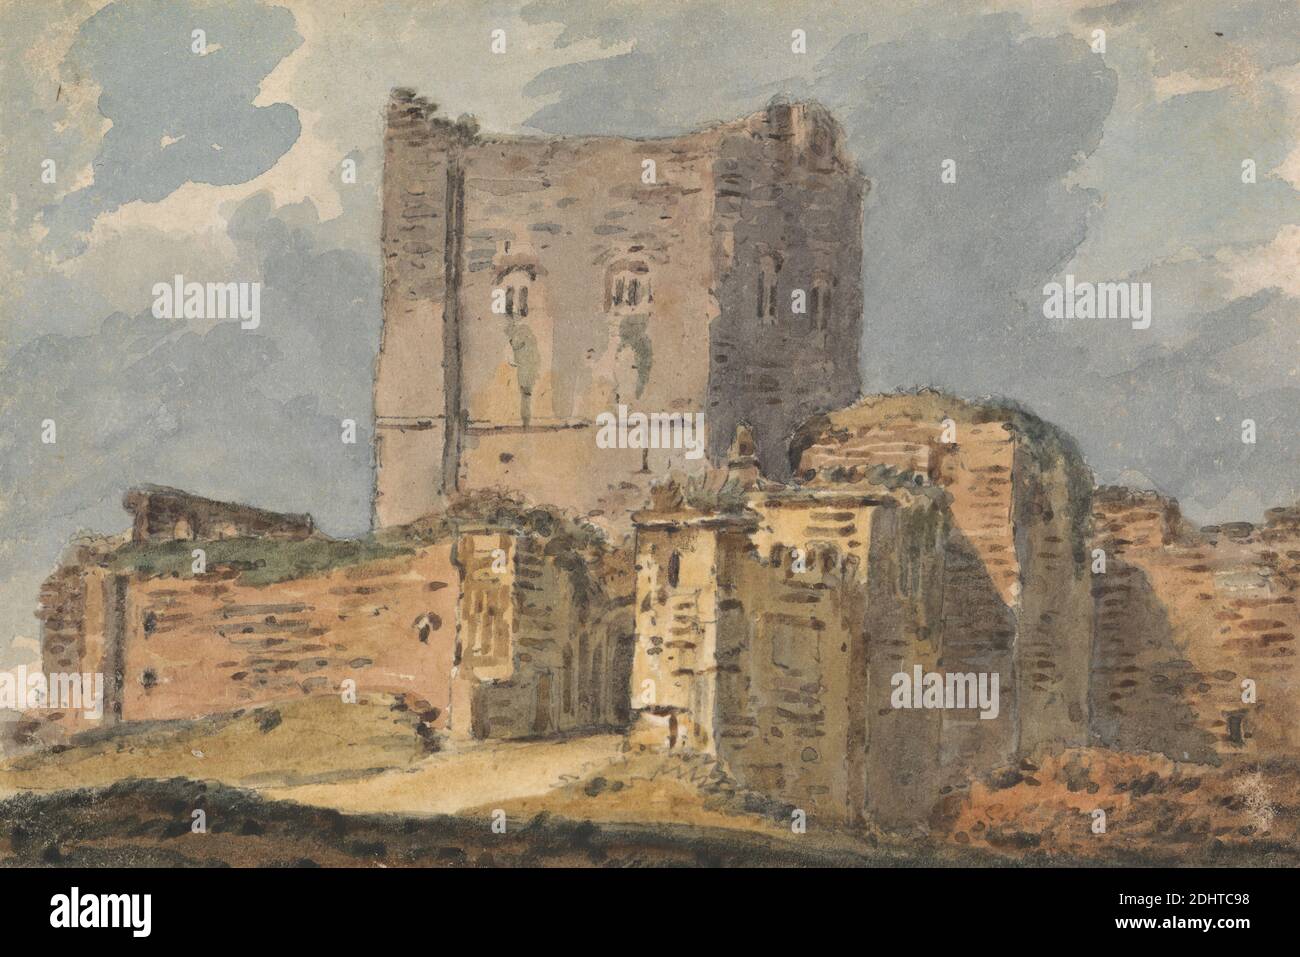 Porchester Castle, Alexander Monro, 1802–1844, undated, Watercolor and graphite on moderately thick, smooth, cream wove paper, Sheet: 2 7/8 × 4 5/16 inches (7.3 × 11 cm), architectural subject, battlements, castle, crenelations, keep, ramparts, ruins, stonework, Towers, walls, England, Europe, Hampshire, Portchester, Portchester Castle, United Kingdom Stock Photo